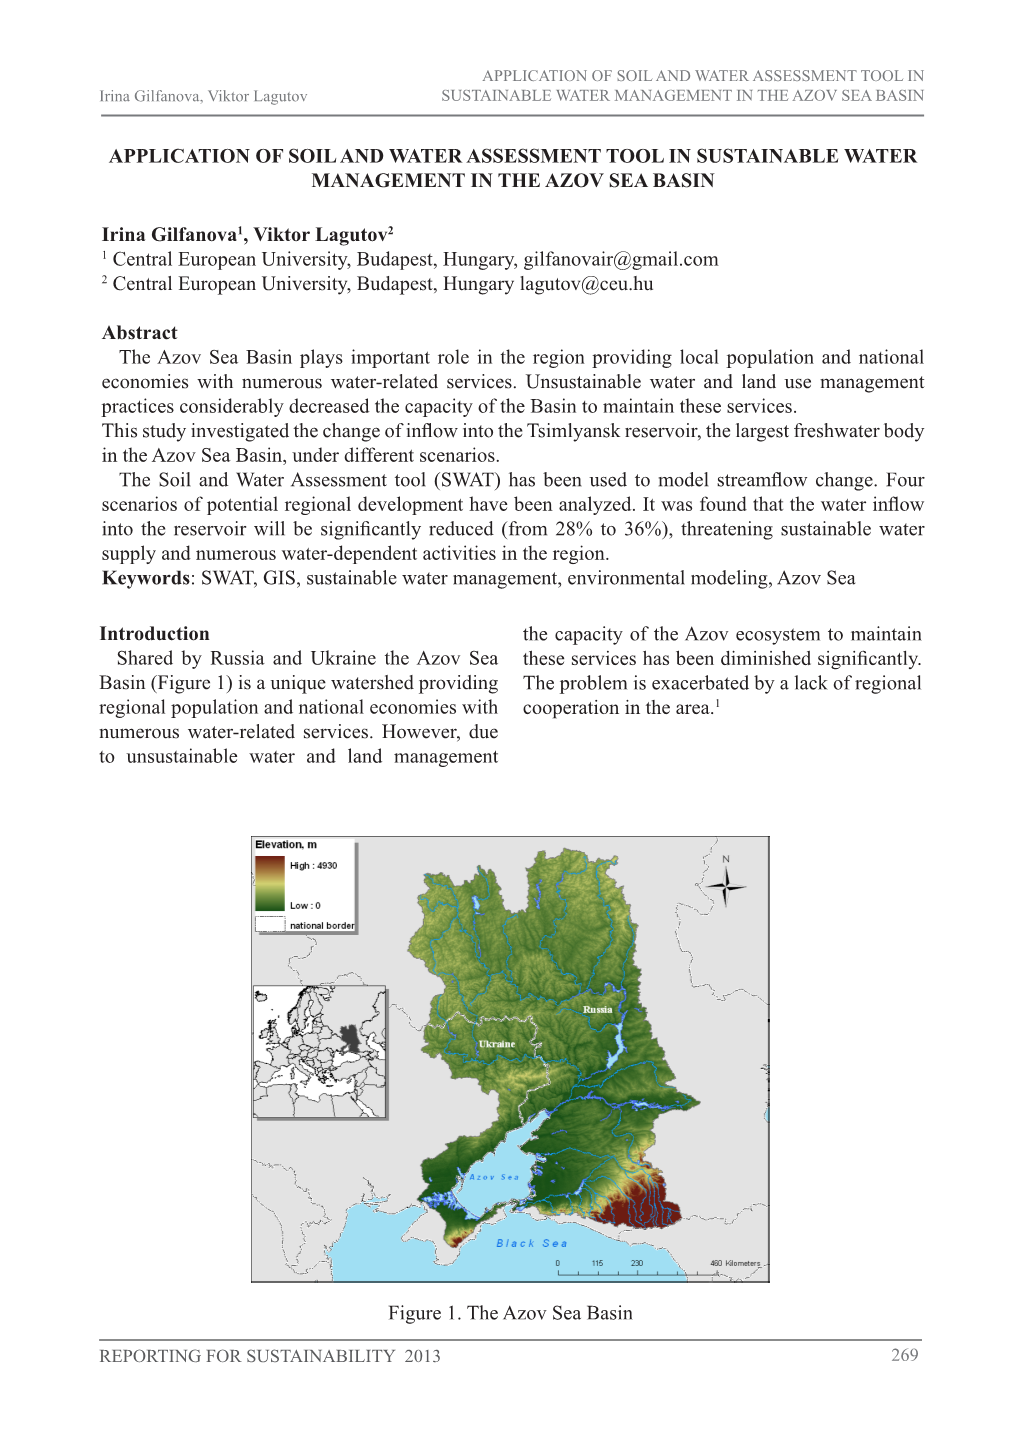 APPLICATION of SOIL and WATER ASSESSMENT TOOL in Irina Gilfanova, Viktor Lagutov SUSTAINABLE WATER MANAGEMENT in the AZOV SEA BASIN